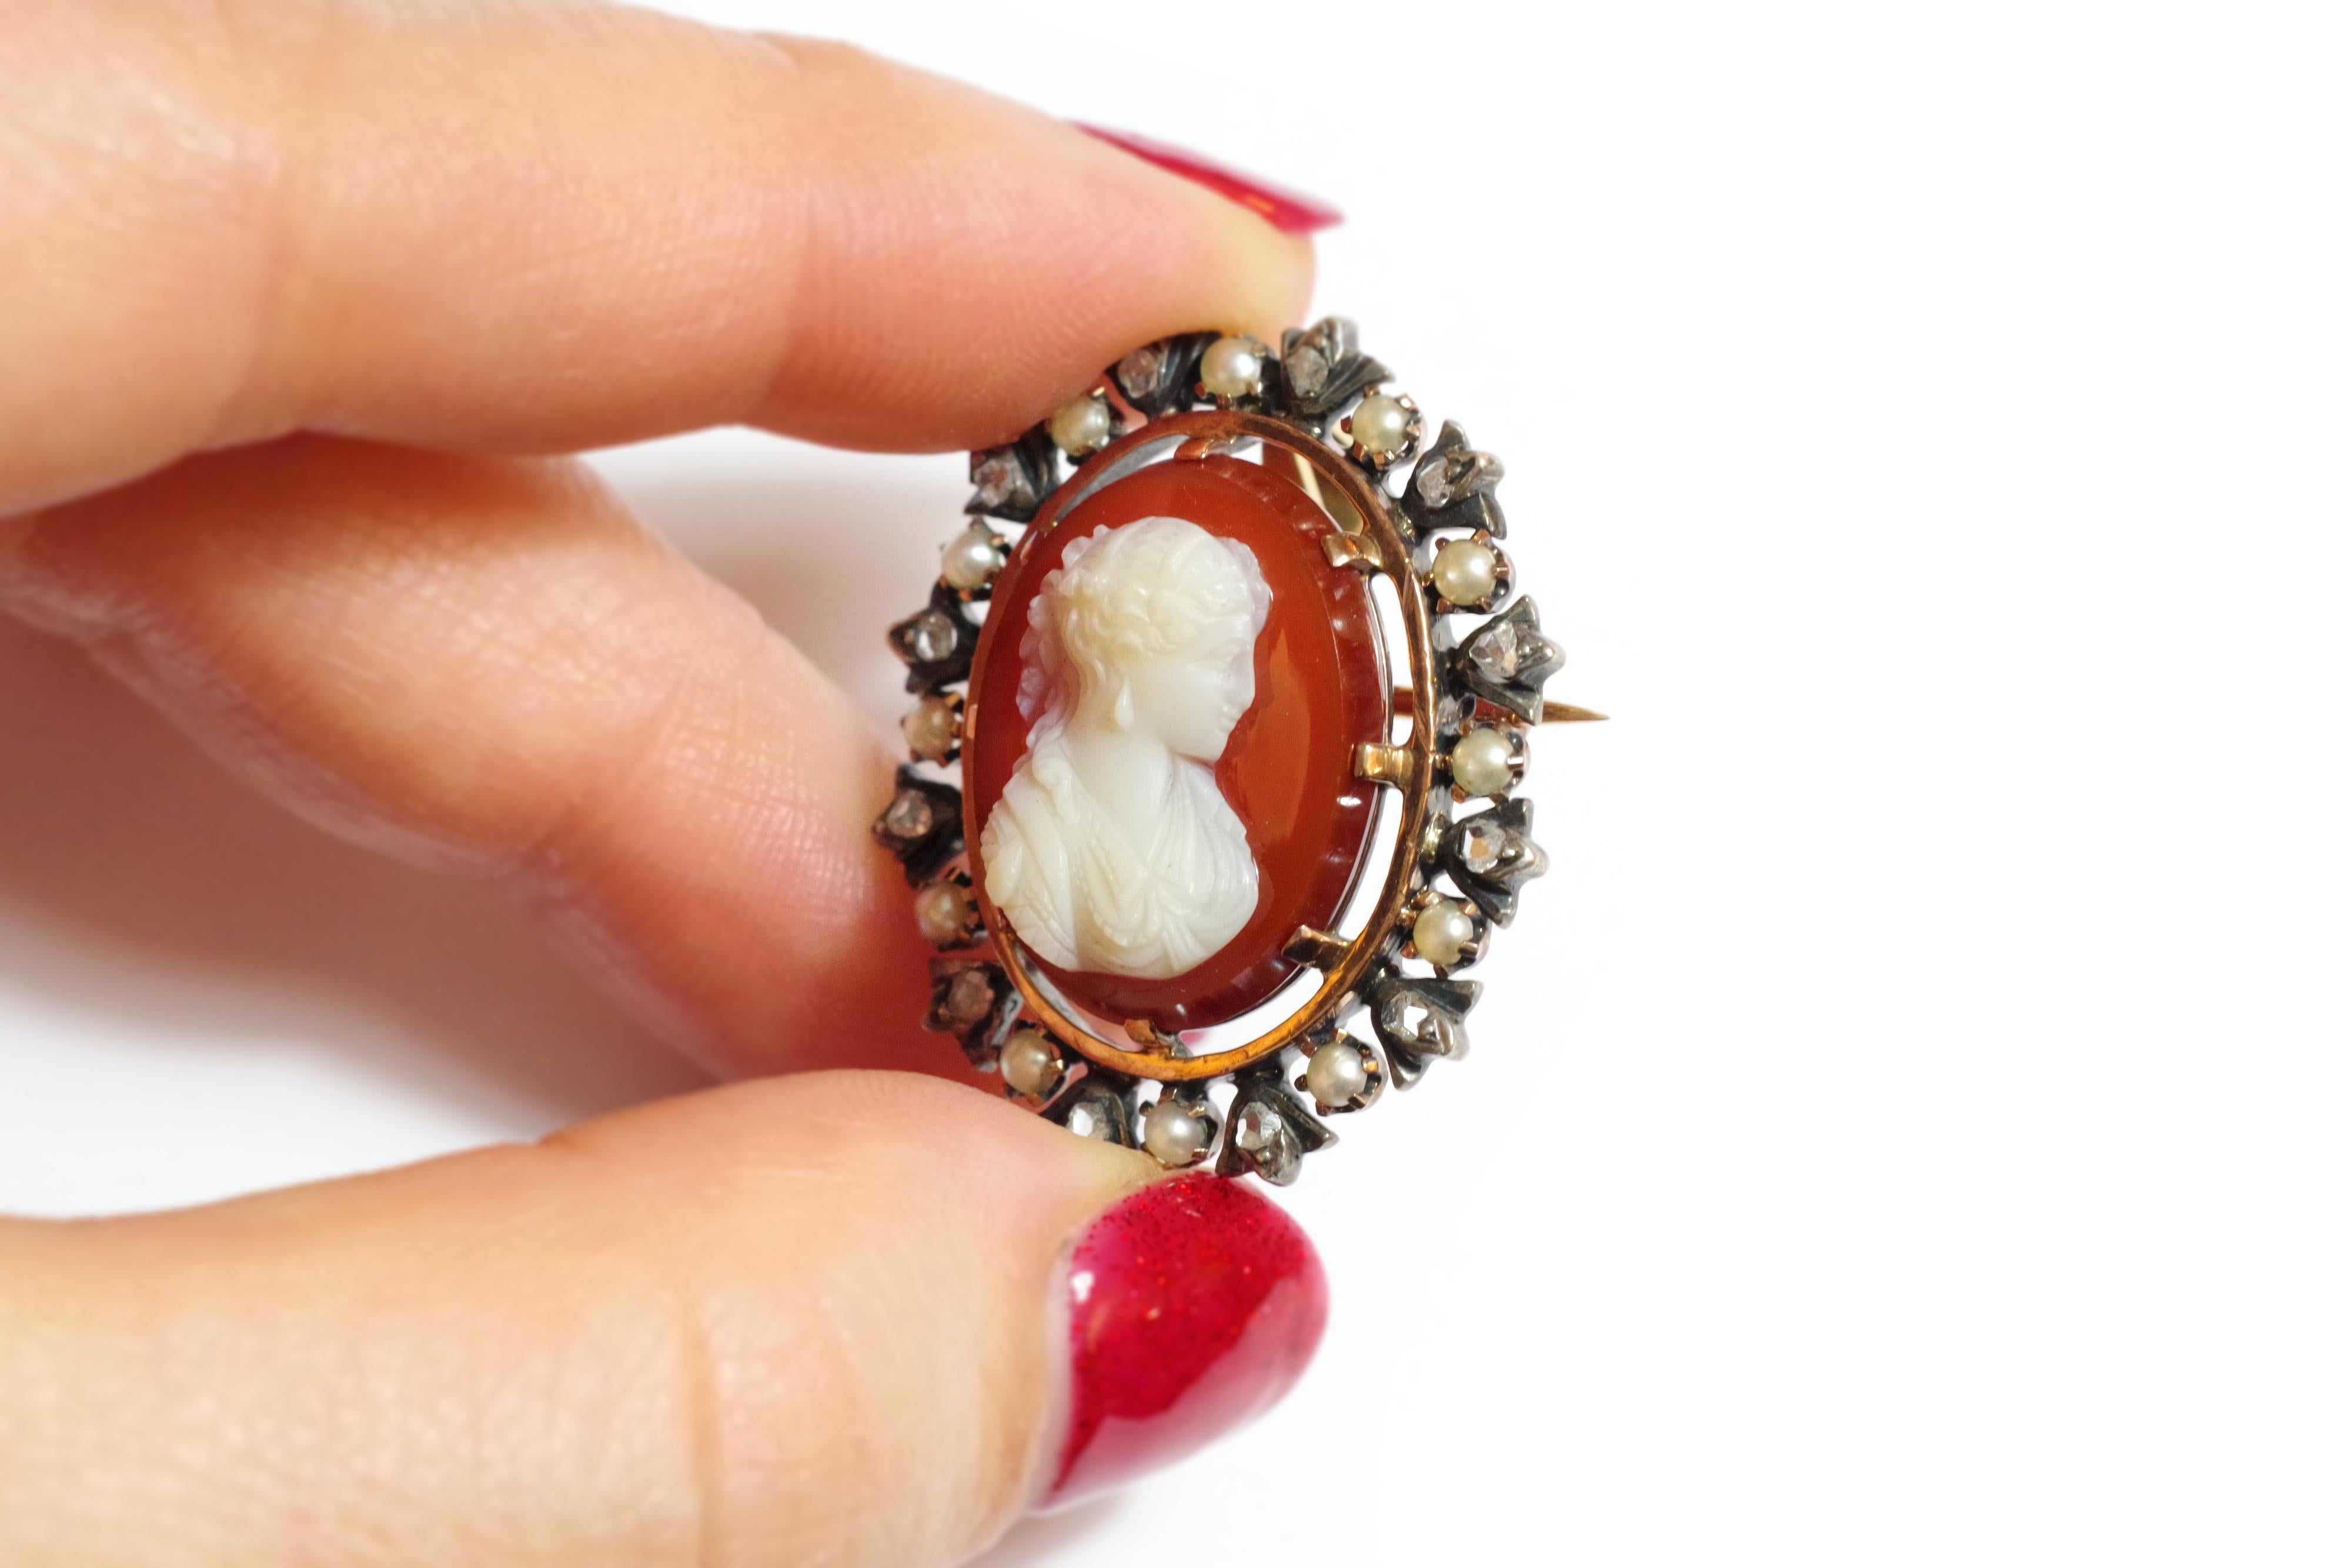 Victorian cameo agate brooch pendant in 18 karat gold, the setting of diamonds is silver. 

The cameo is in agate with two layers (brown and white), it adorns the center of the jewel. On it is carved on high-relief a woman in profile richly adorned